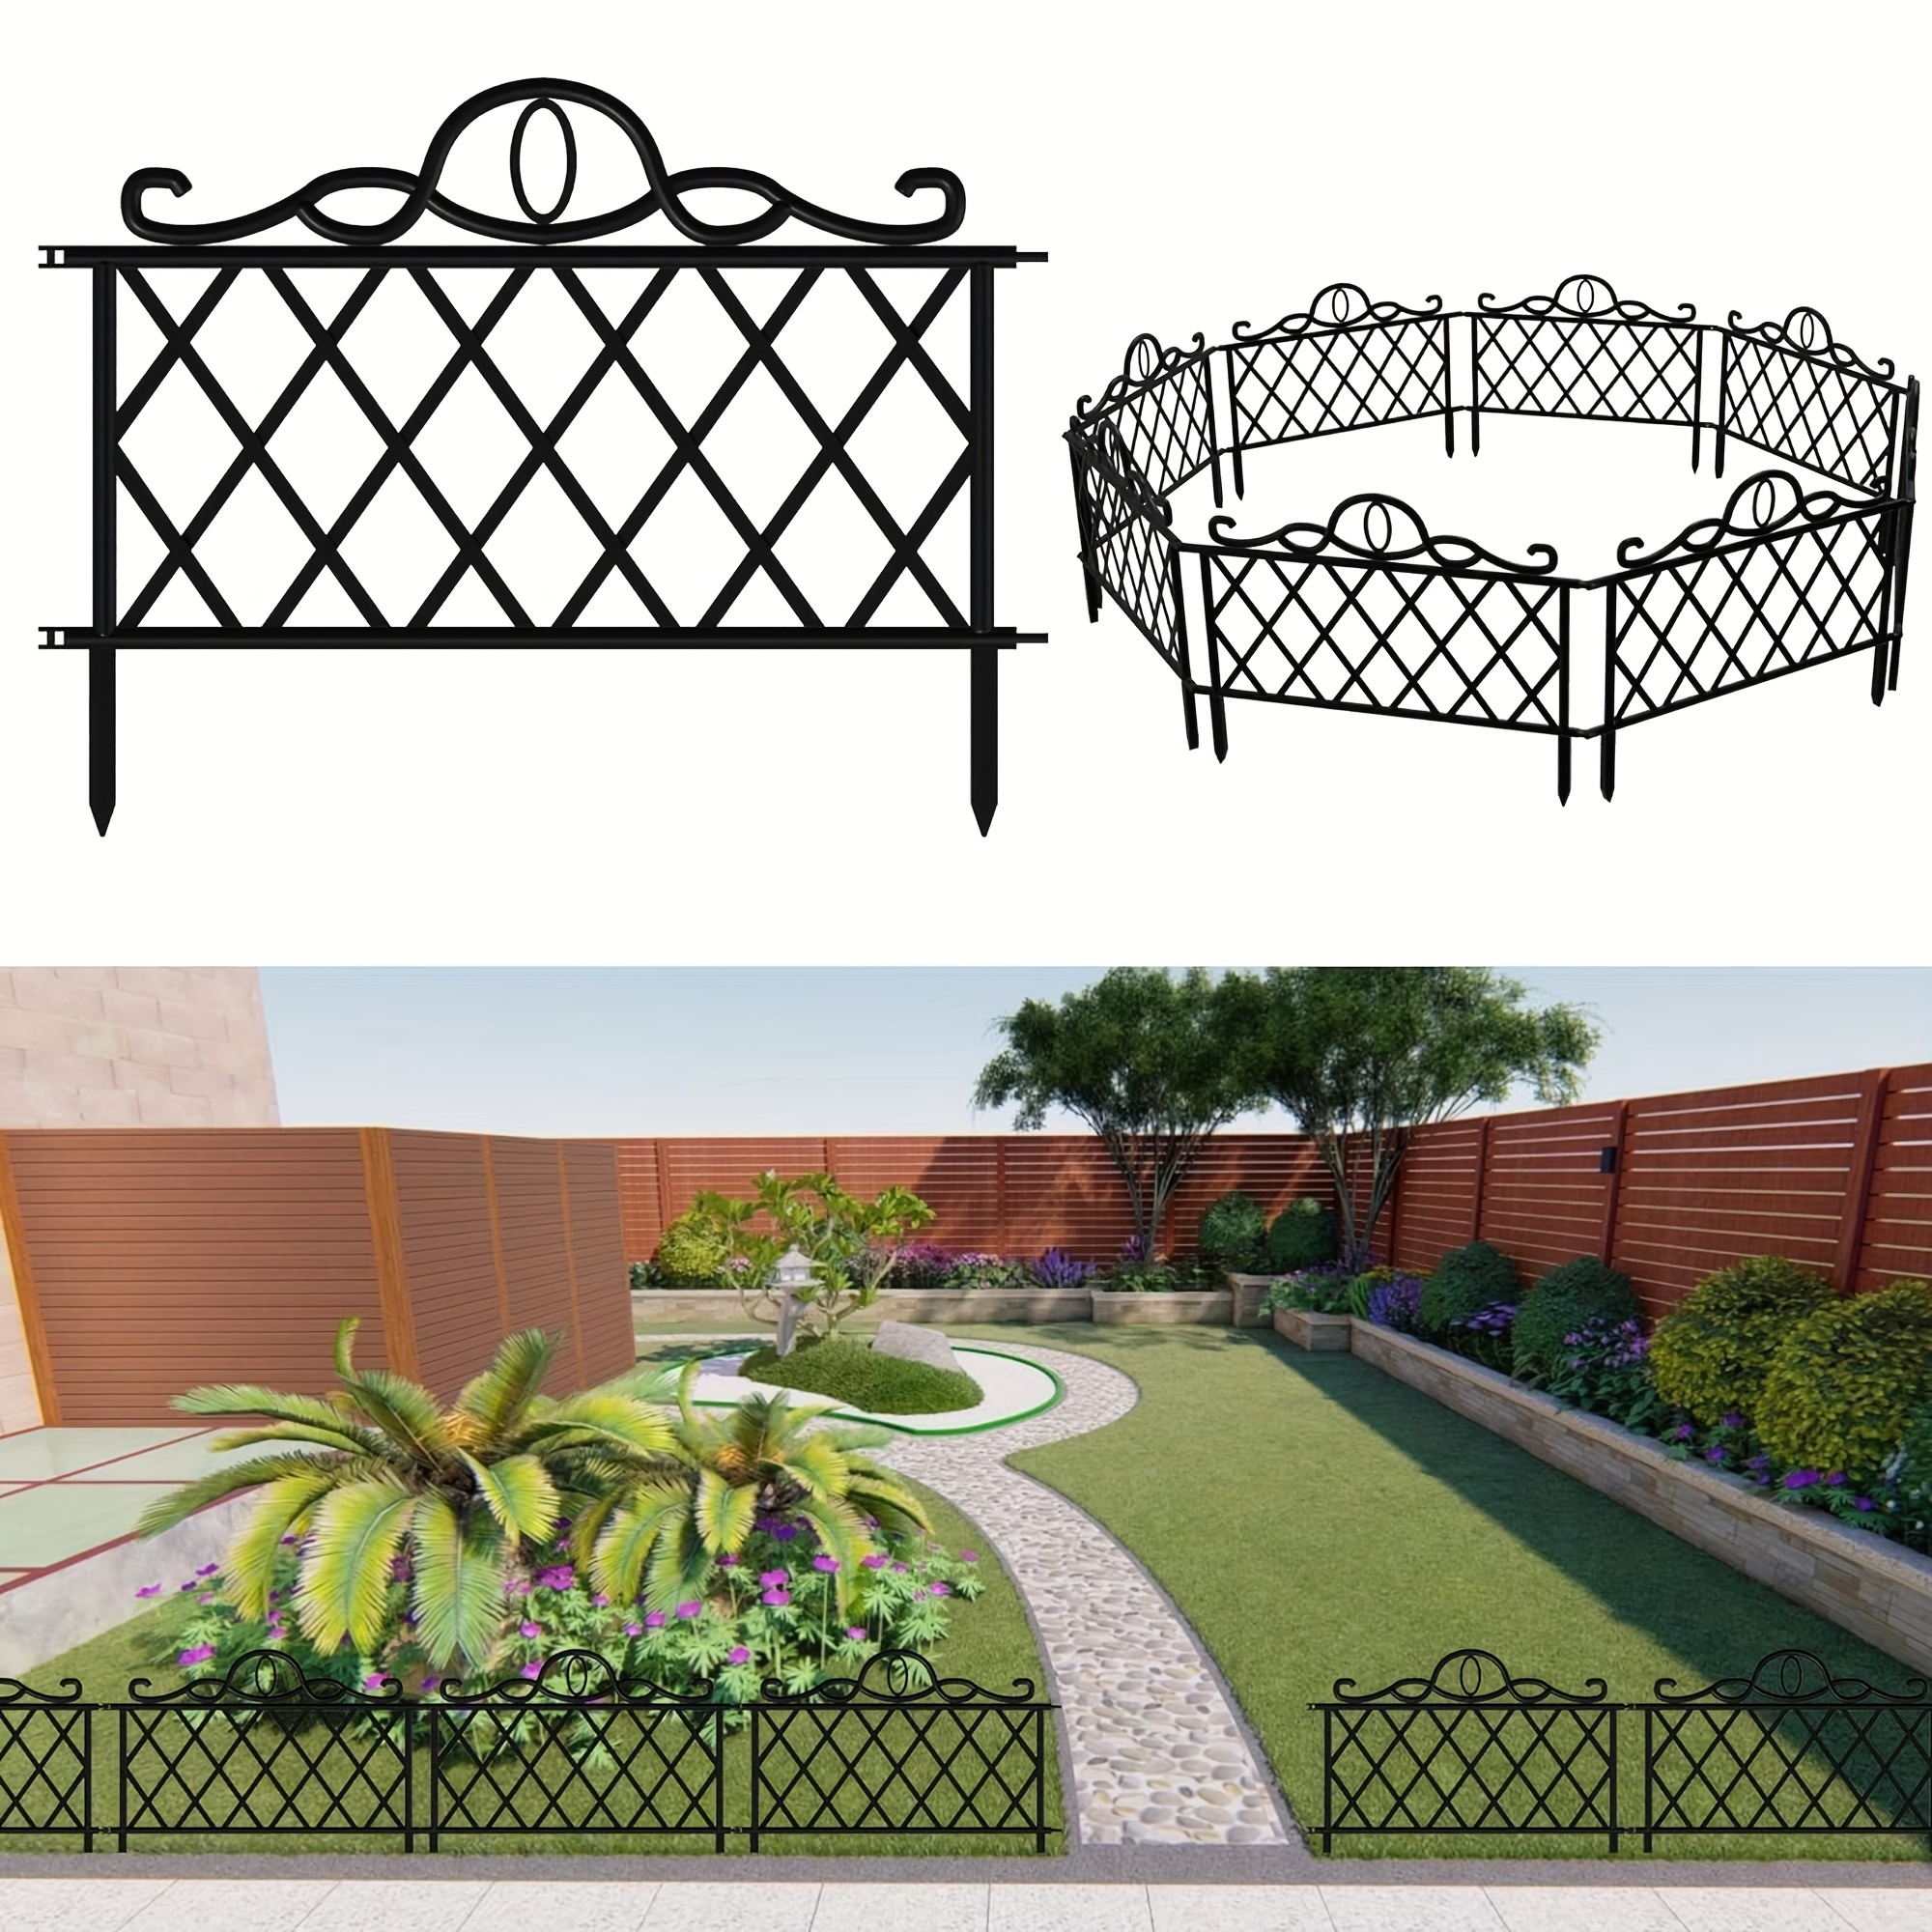 

4/8pcs Black Plastic Garden Fence Set, Interlocking Flexible Garden Edging Border With Classic Design, Easy No-dig Installation For Landscaping And Flower Beds